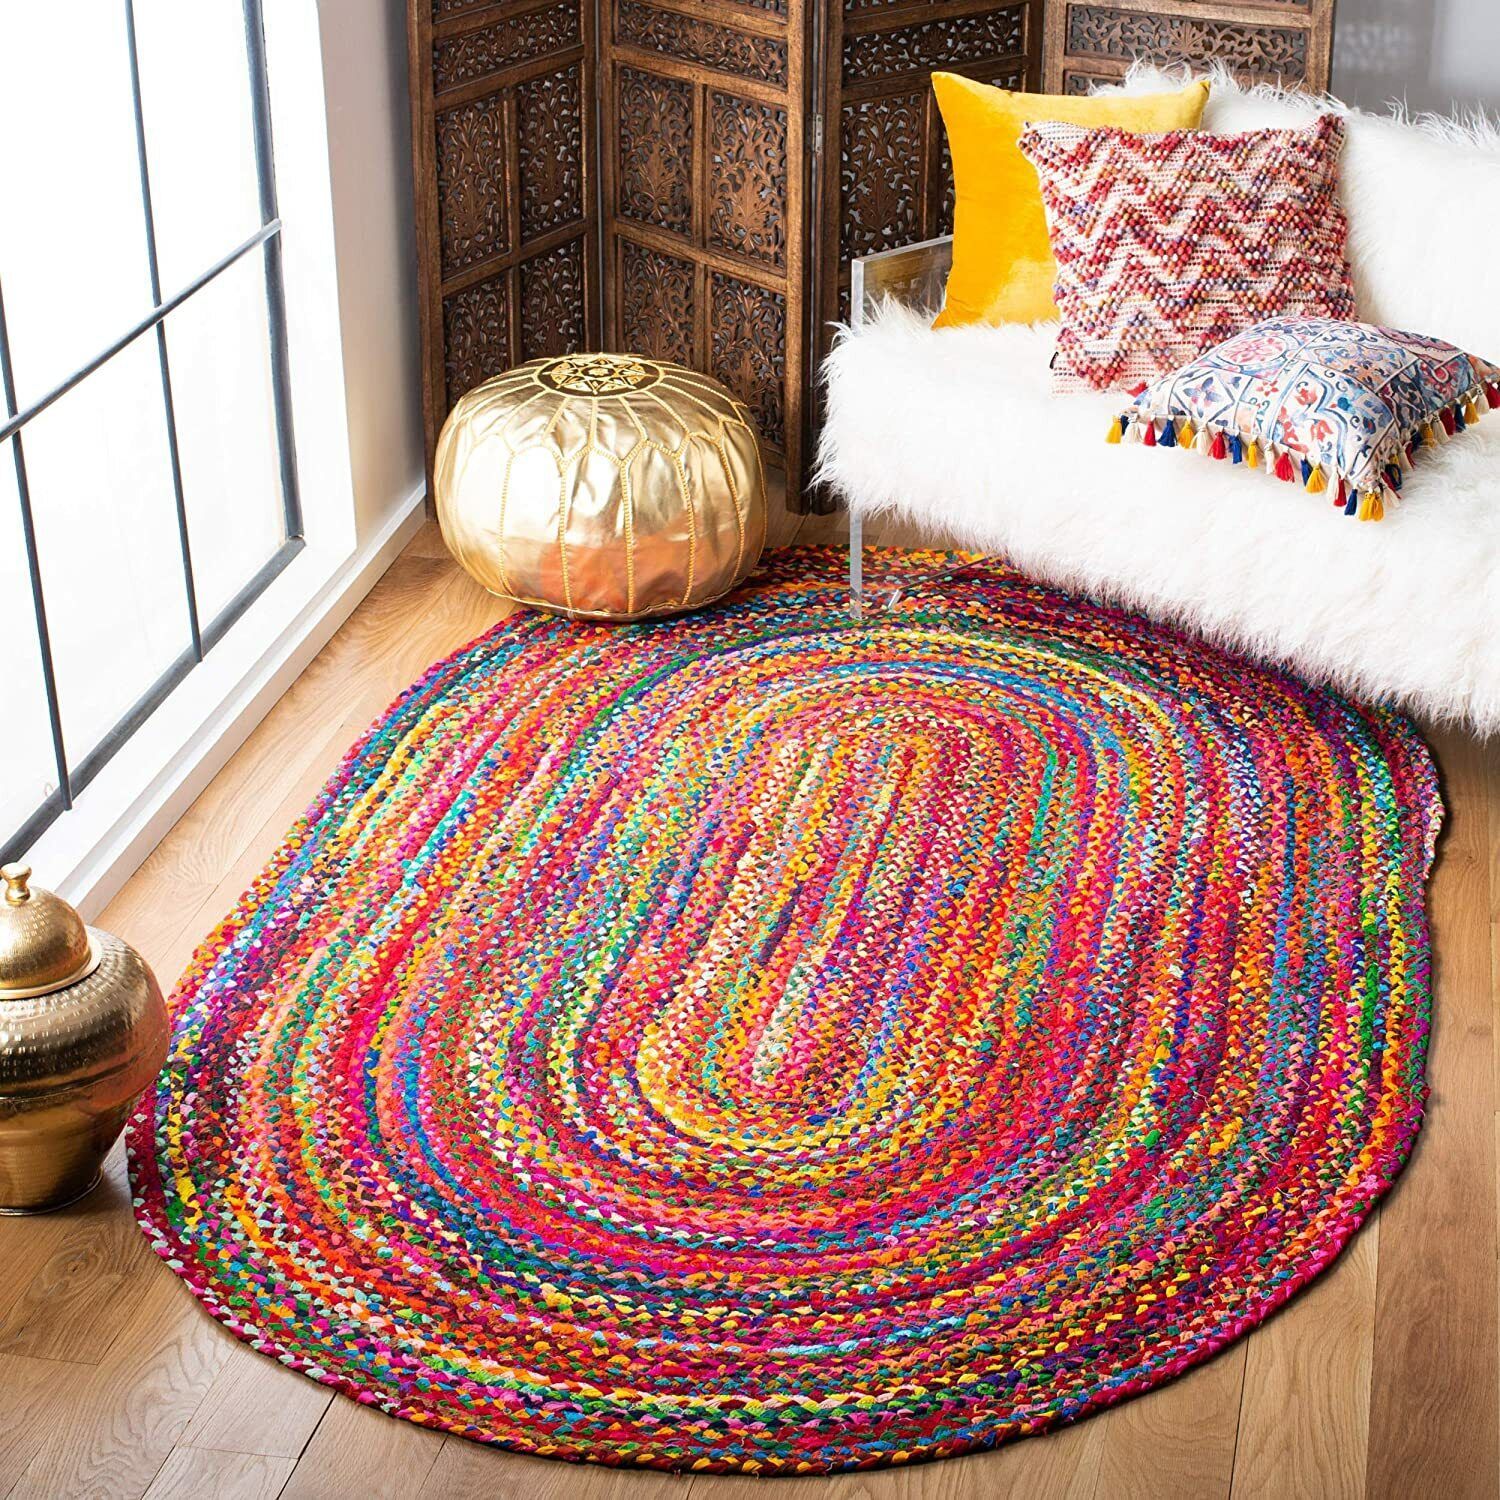 Rug 100% Cotton Handmade Oval Rug Braided Style Modern Look Area Yoga Rugs  Mat | Ebay Throughout Hand Braided Rugs (View 11 of 15)